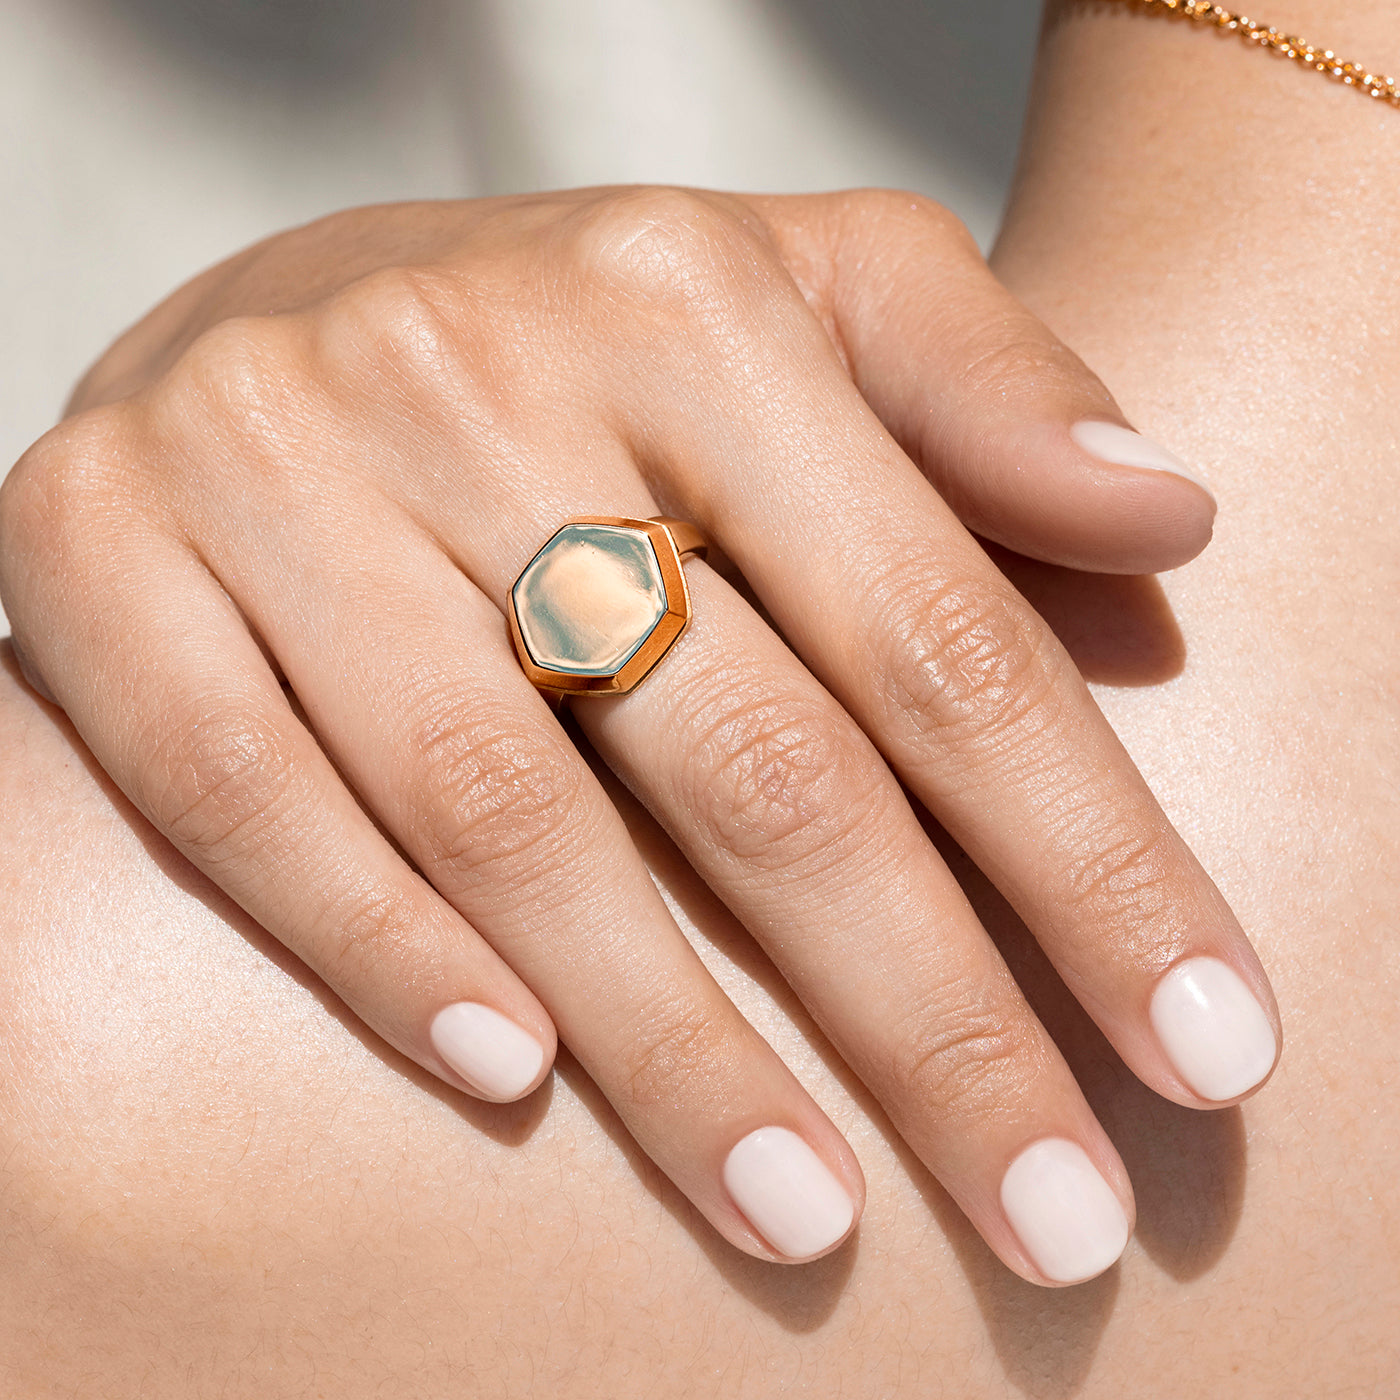 Close Up of Woman's Hand Over Her Shoulder Wearing a Sustainable Gold Ring Featuring a Flat Hexagonal Design at the Top of the Ring on her Middle Finger